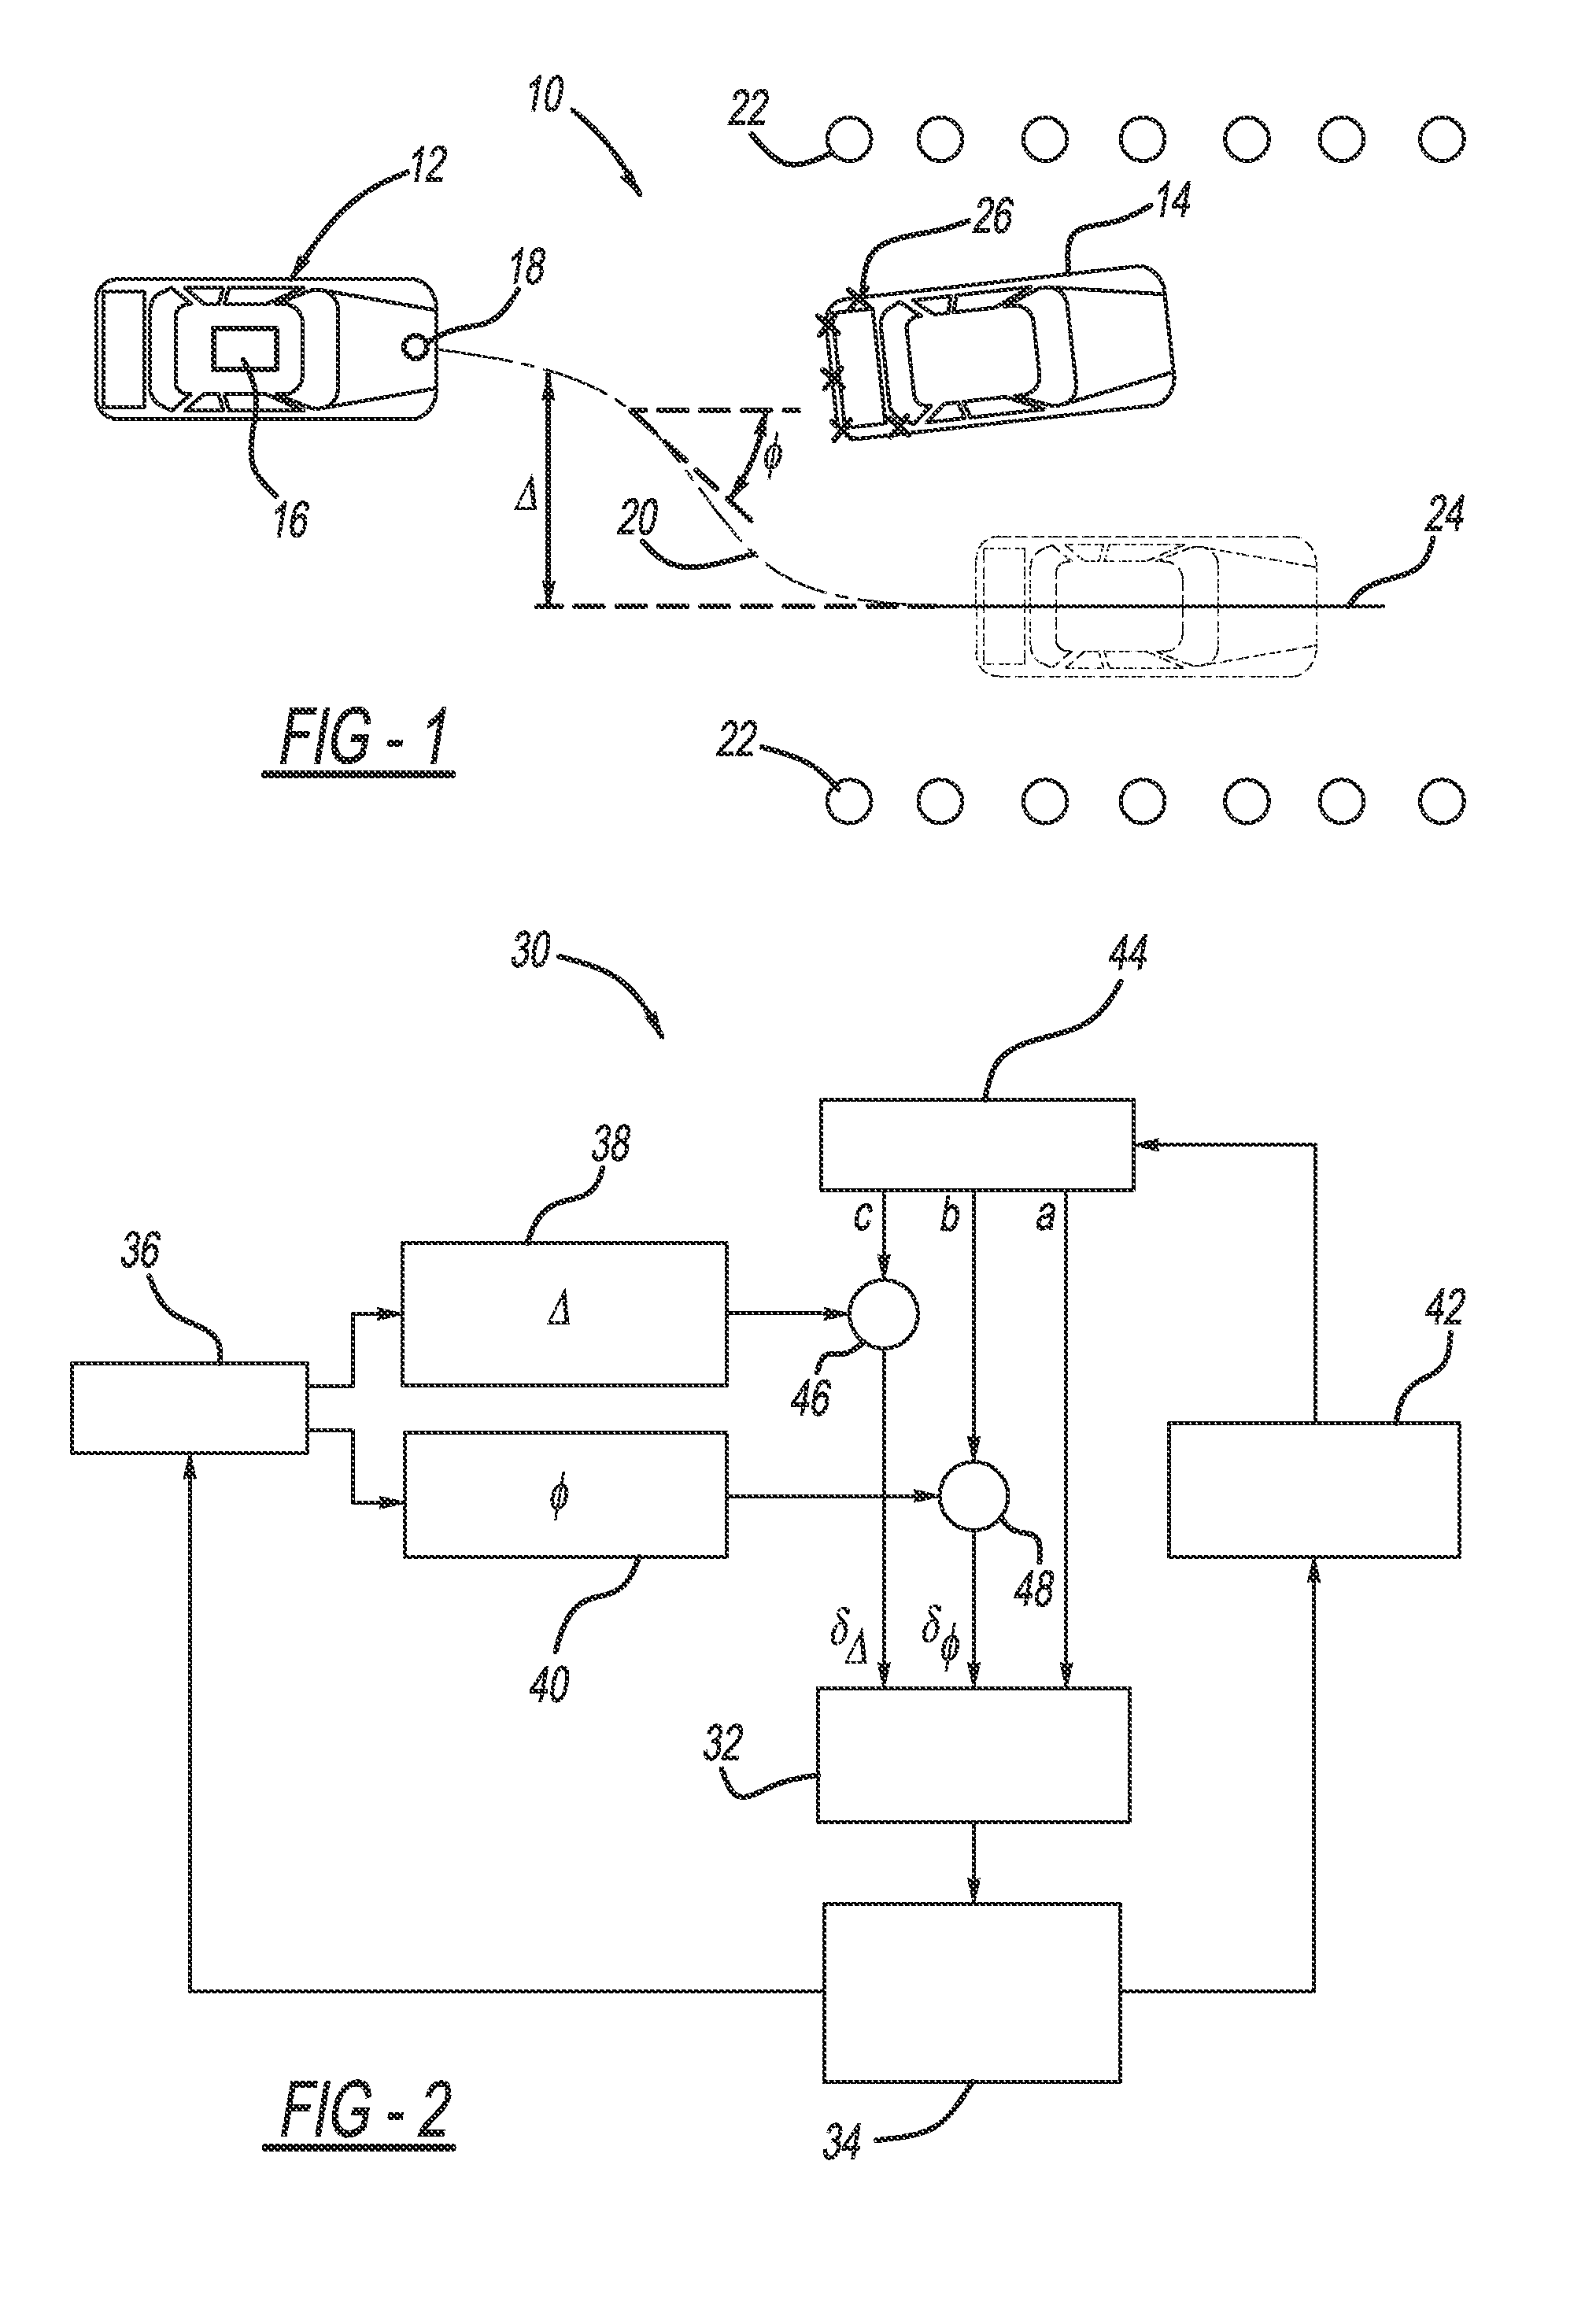 Path planning for evasive steering maneuver in presence of target vehicle and surrounding objects